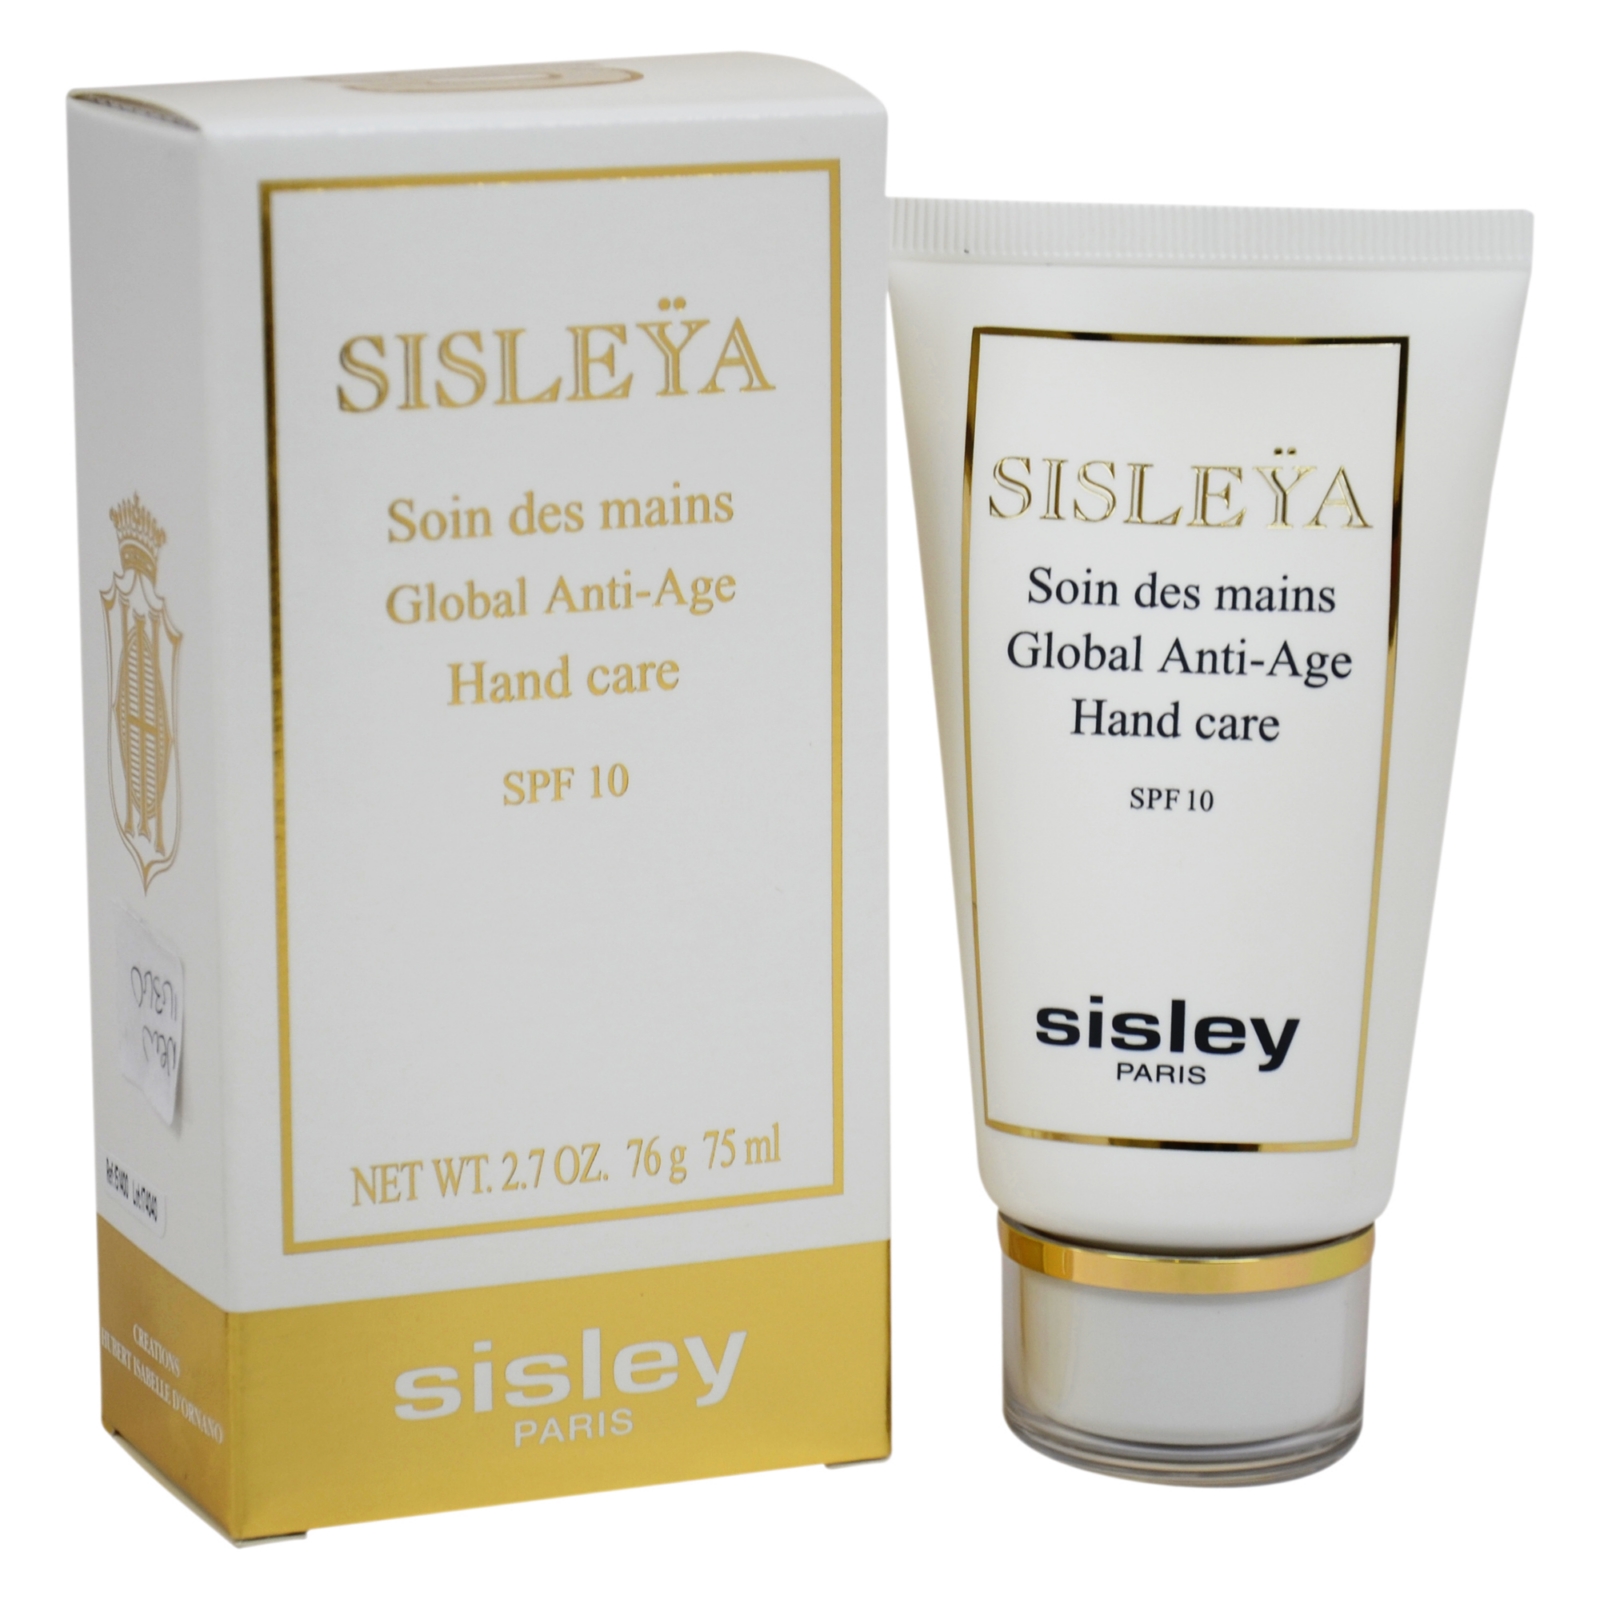 Sisley Global Anti-Age Hand Care SPF 10 by  for Unisex - 2.7 oz Hand Care